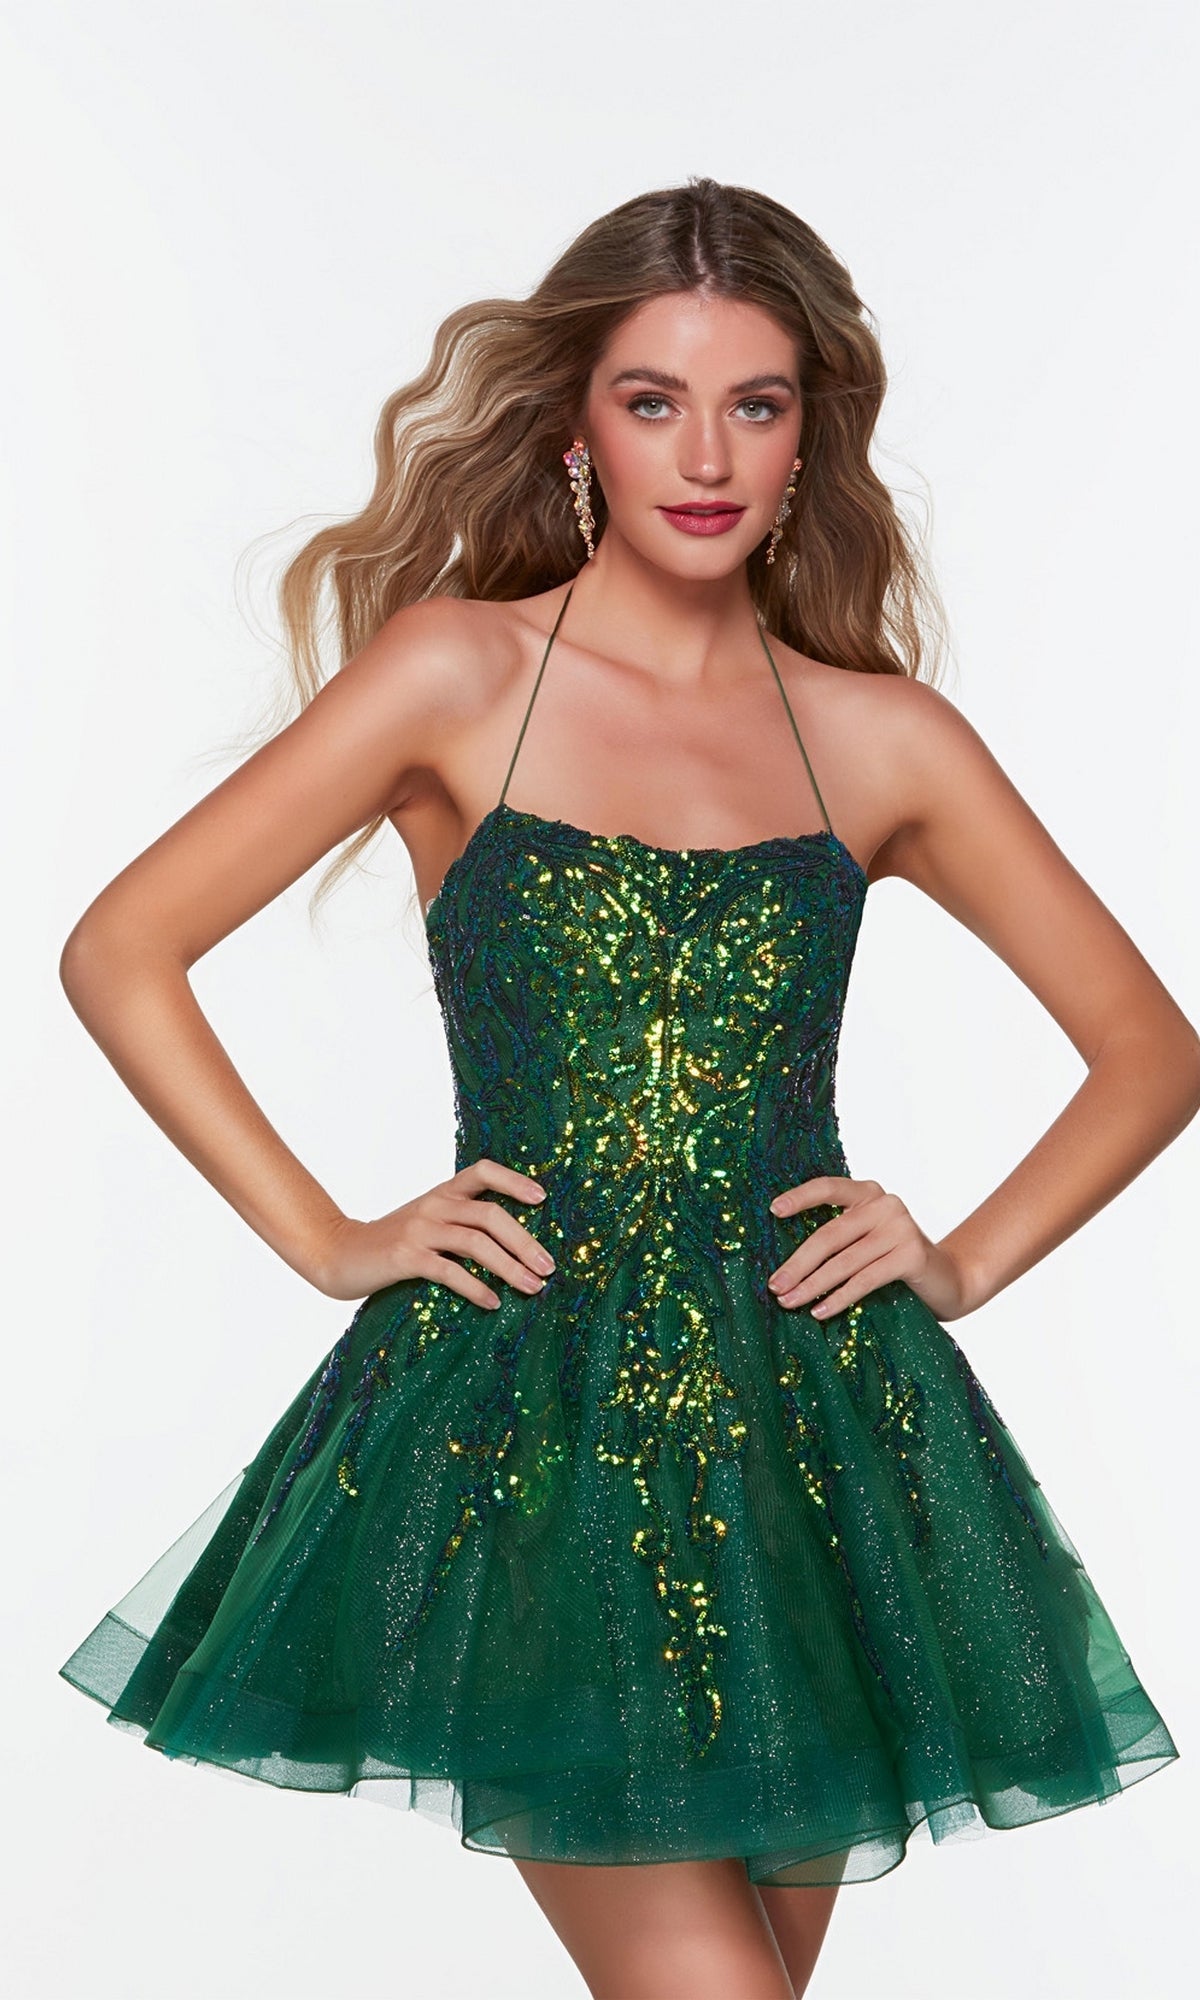 Pine Short Homecoming Dress By Alyce 3111